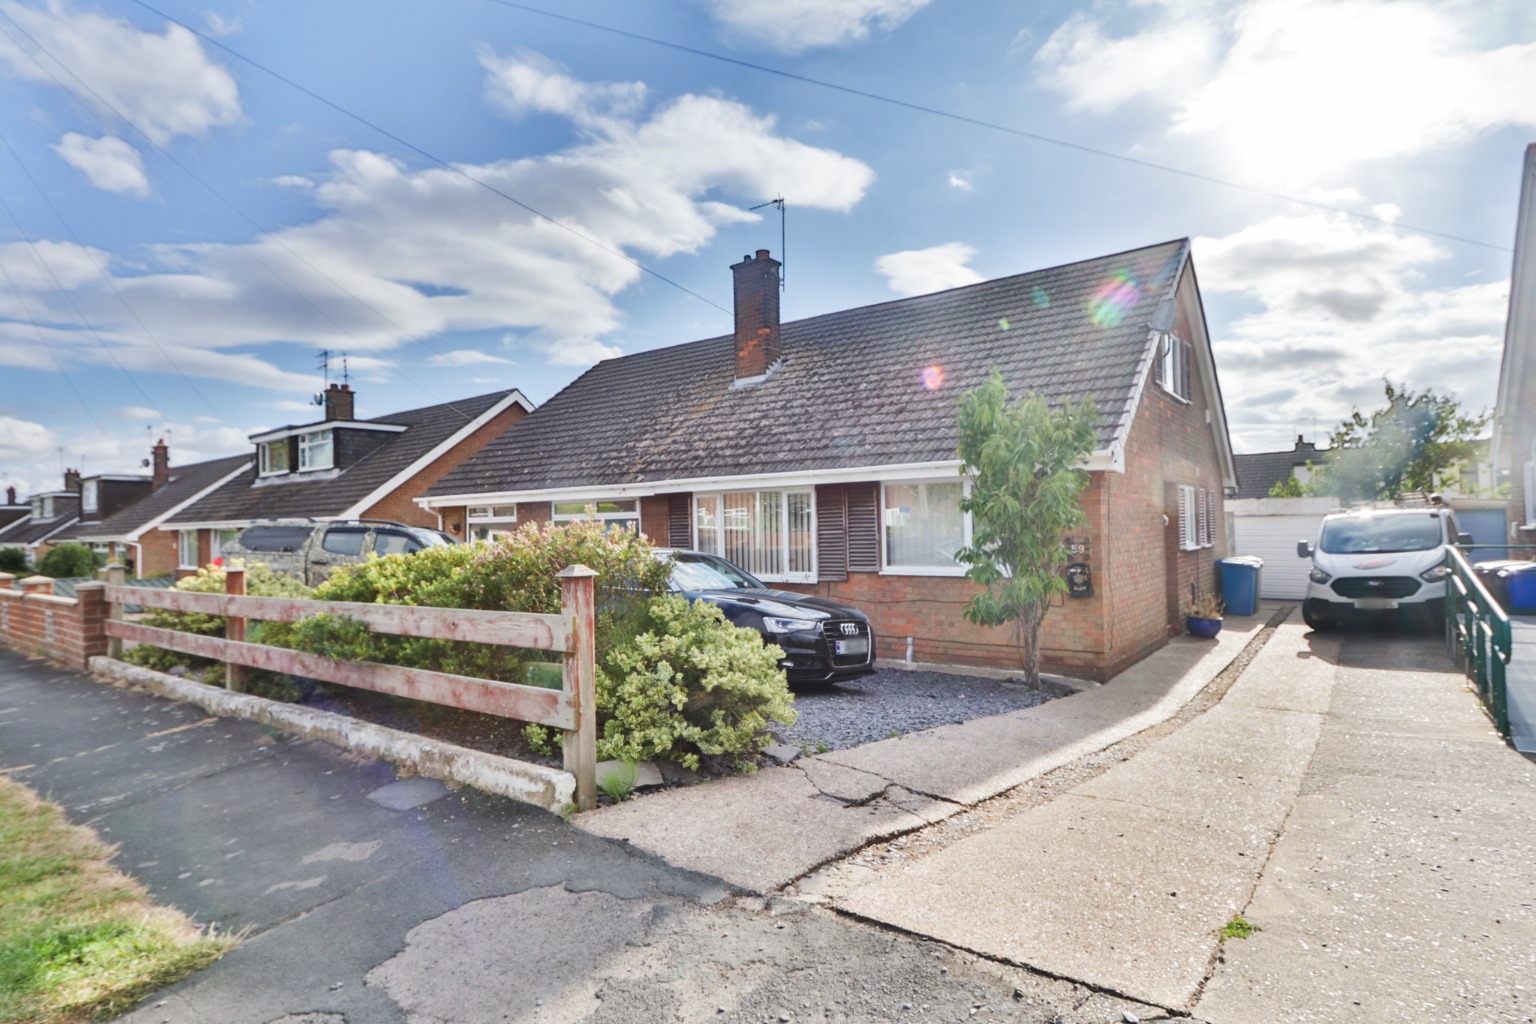 3 bed semi-detached house for sale in Eastfield Road, Hull - Property Image 1